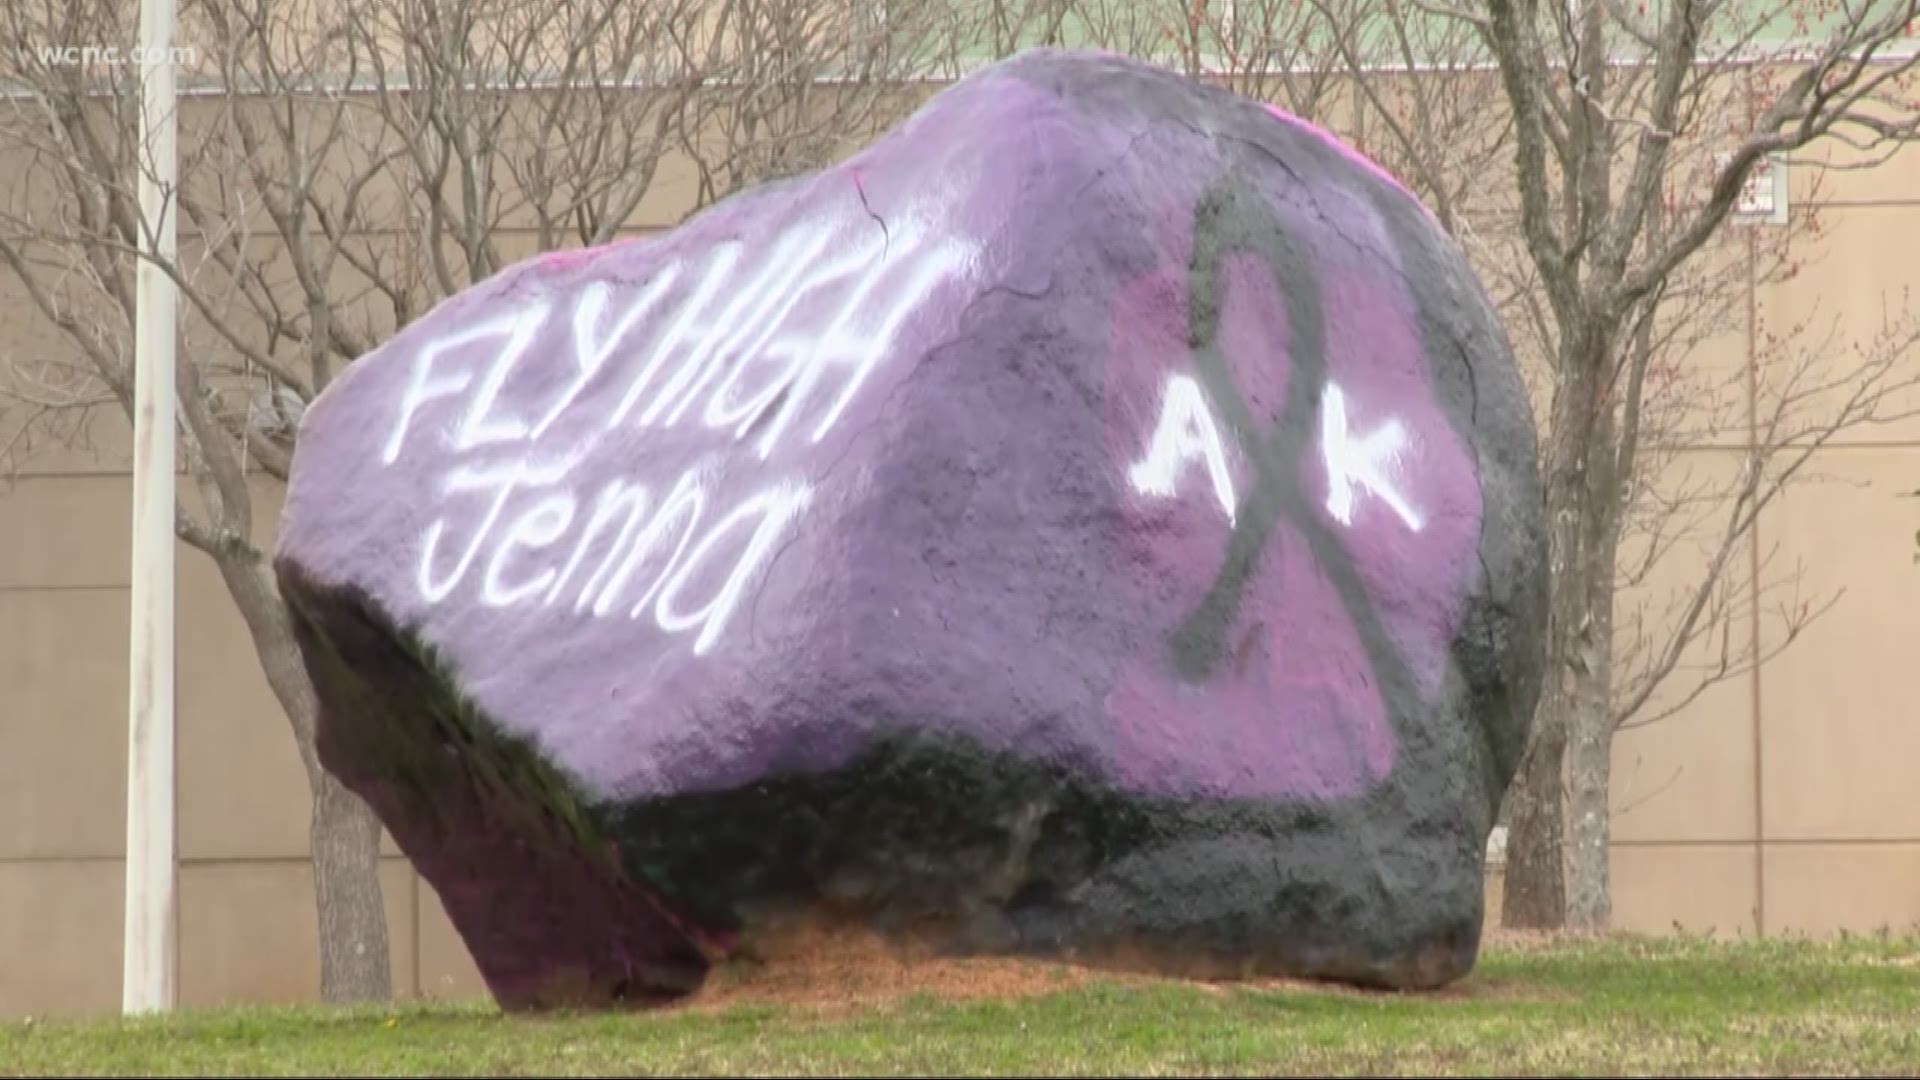 Students and family members at Ardrey Kell High School will pay tribute to 15-year-old Jenna Hewitt, who was killed in a double murder-suicide near Providence Country Club last weekend.